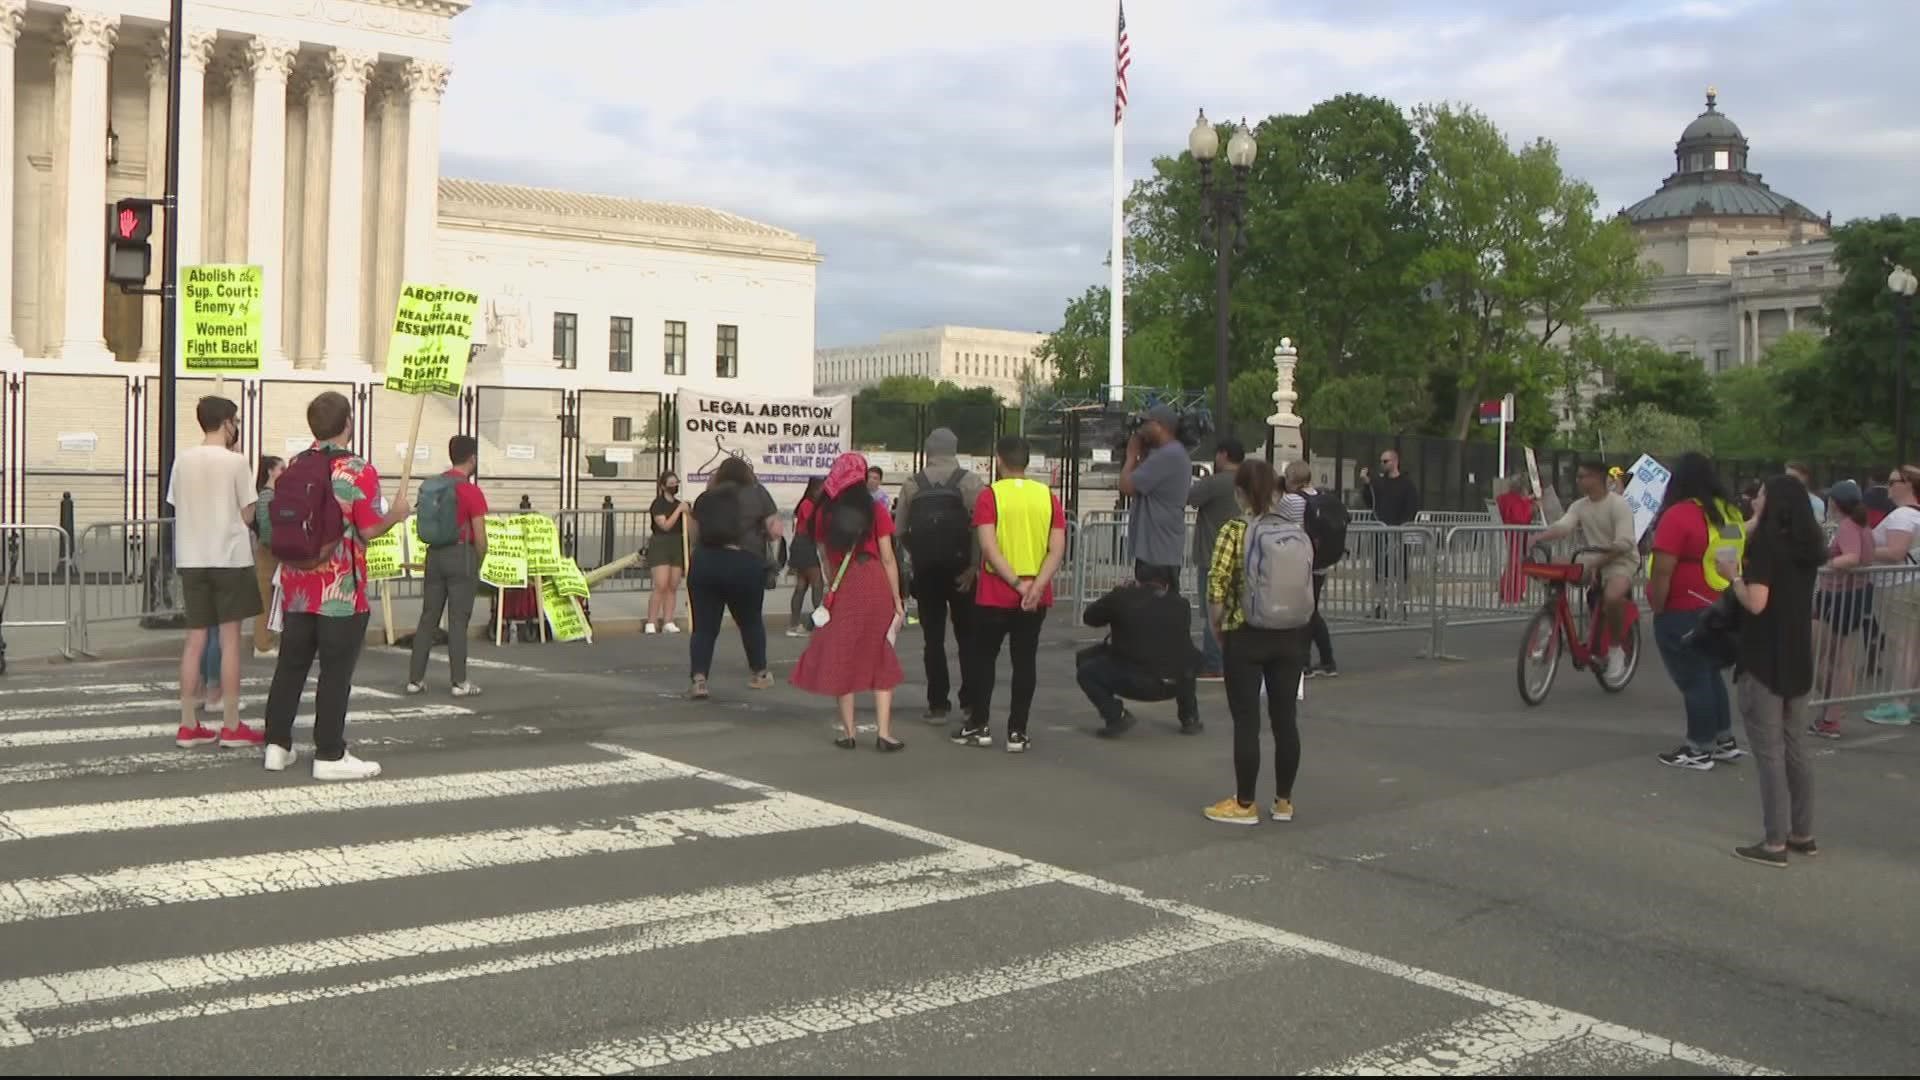 Major organizations are planning to host a rally on Saturday in support of abortion rights.